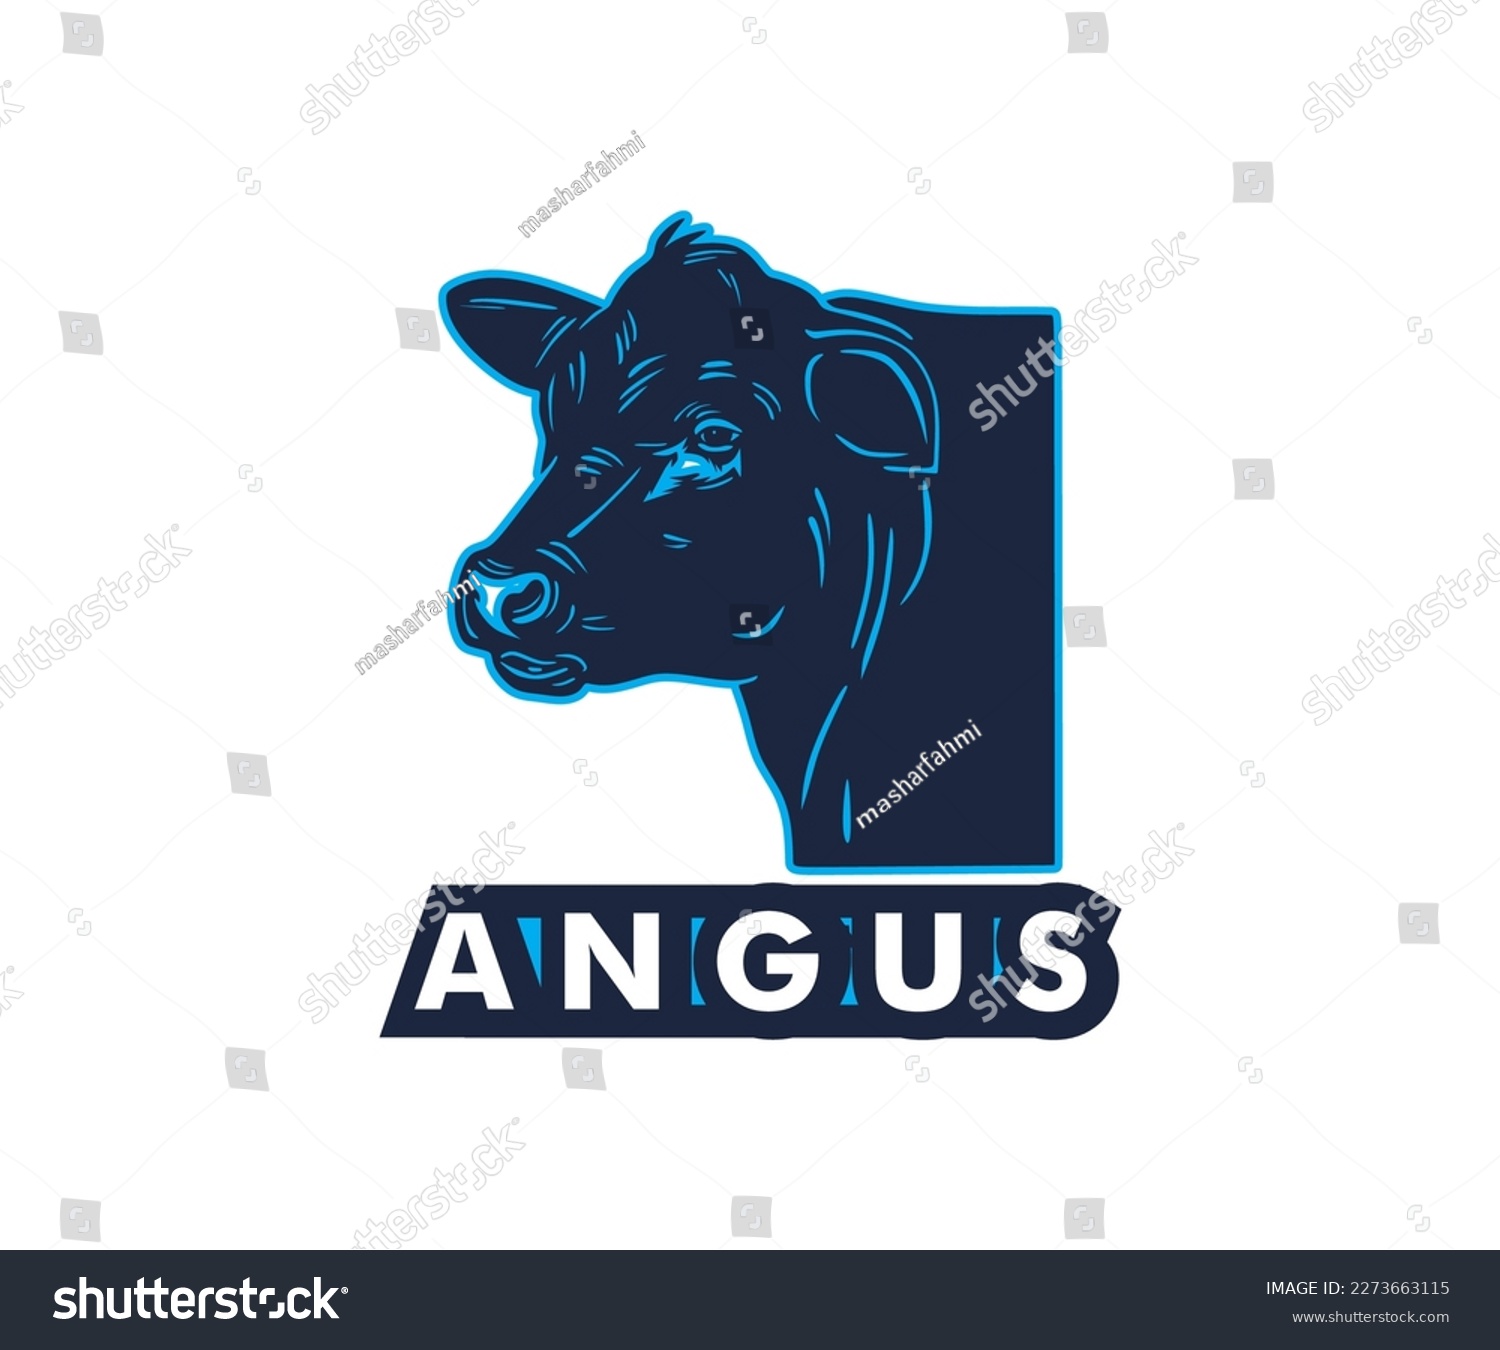 SVG of ANGUS CATTLE HEAD LOGO silhouette of great bull head vector illustrations svg